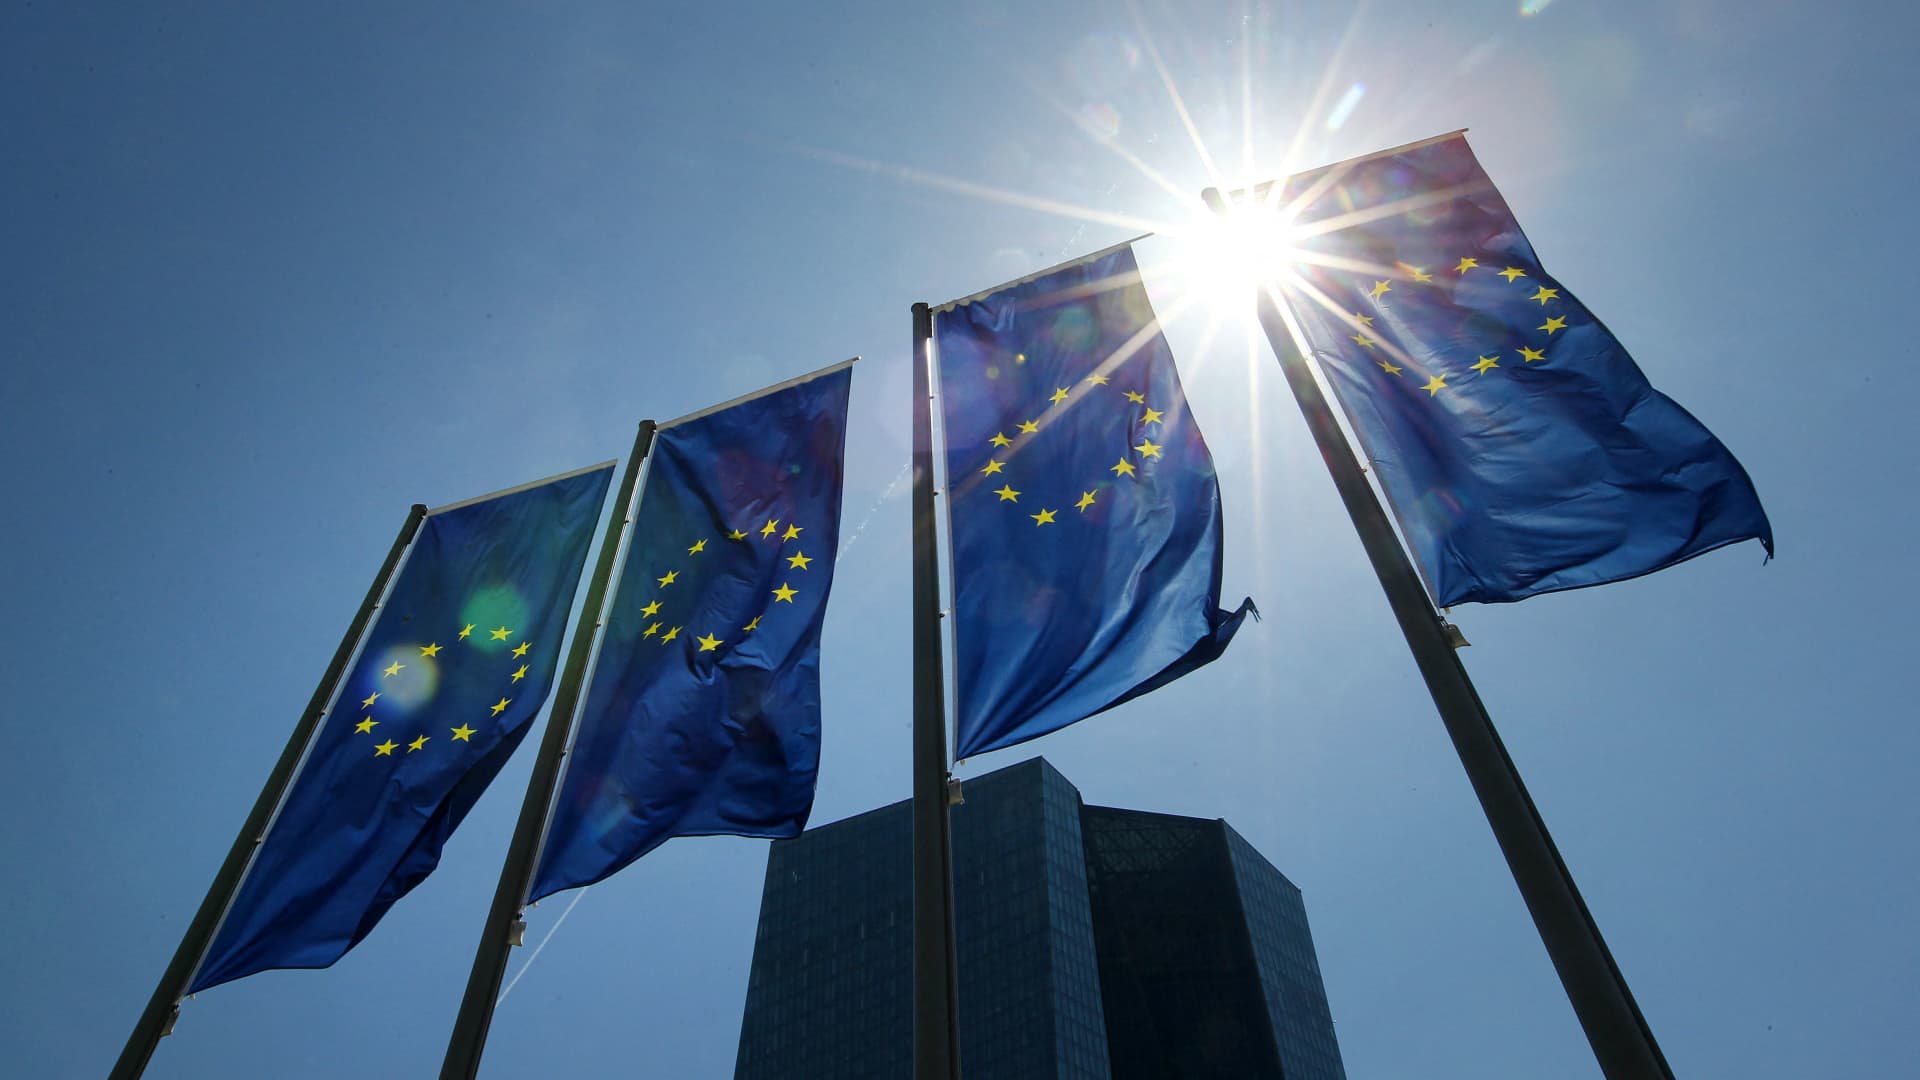 The European Central Bank raises interest rates by 75 basis points